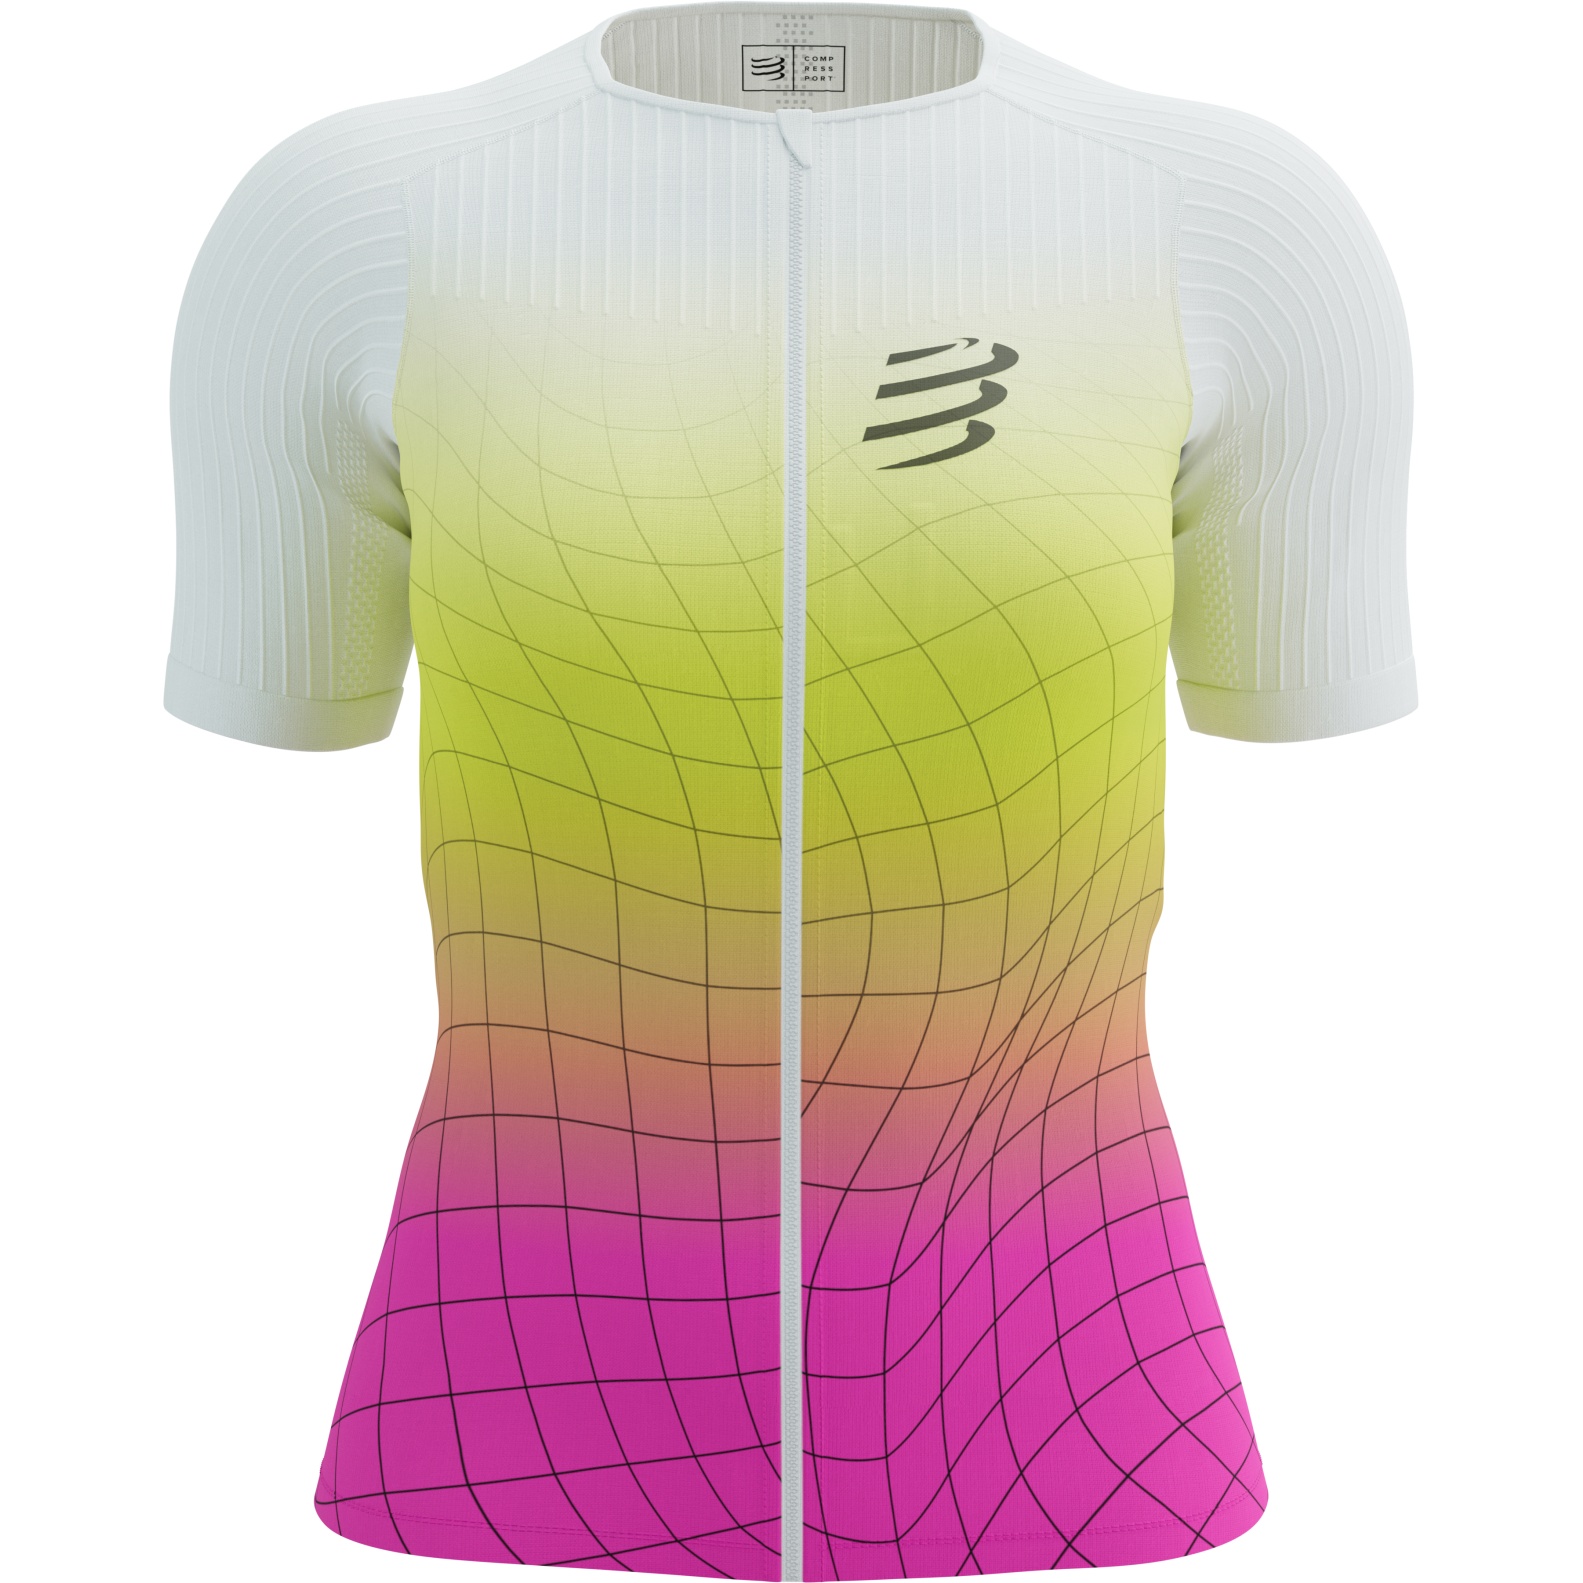 Picture of Compressport Tri Postural Aero Short Sleeve Top Women - white/safety yellow/neon pink